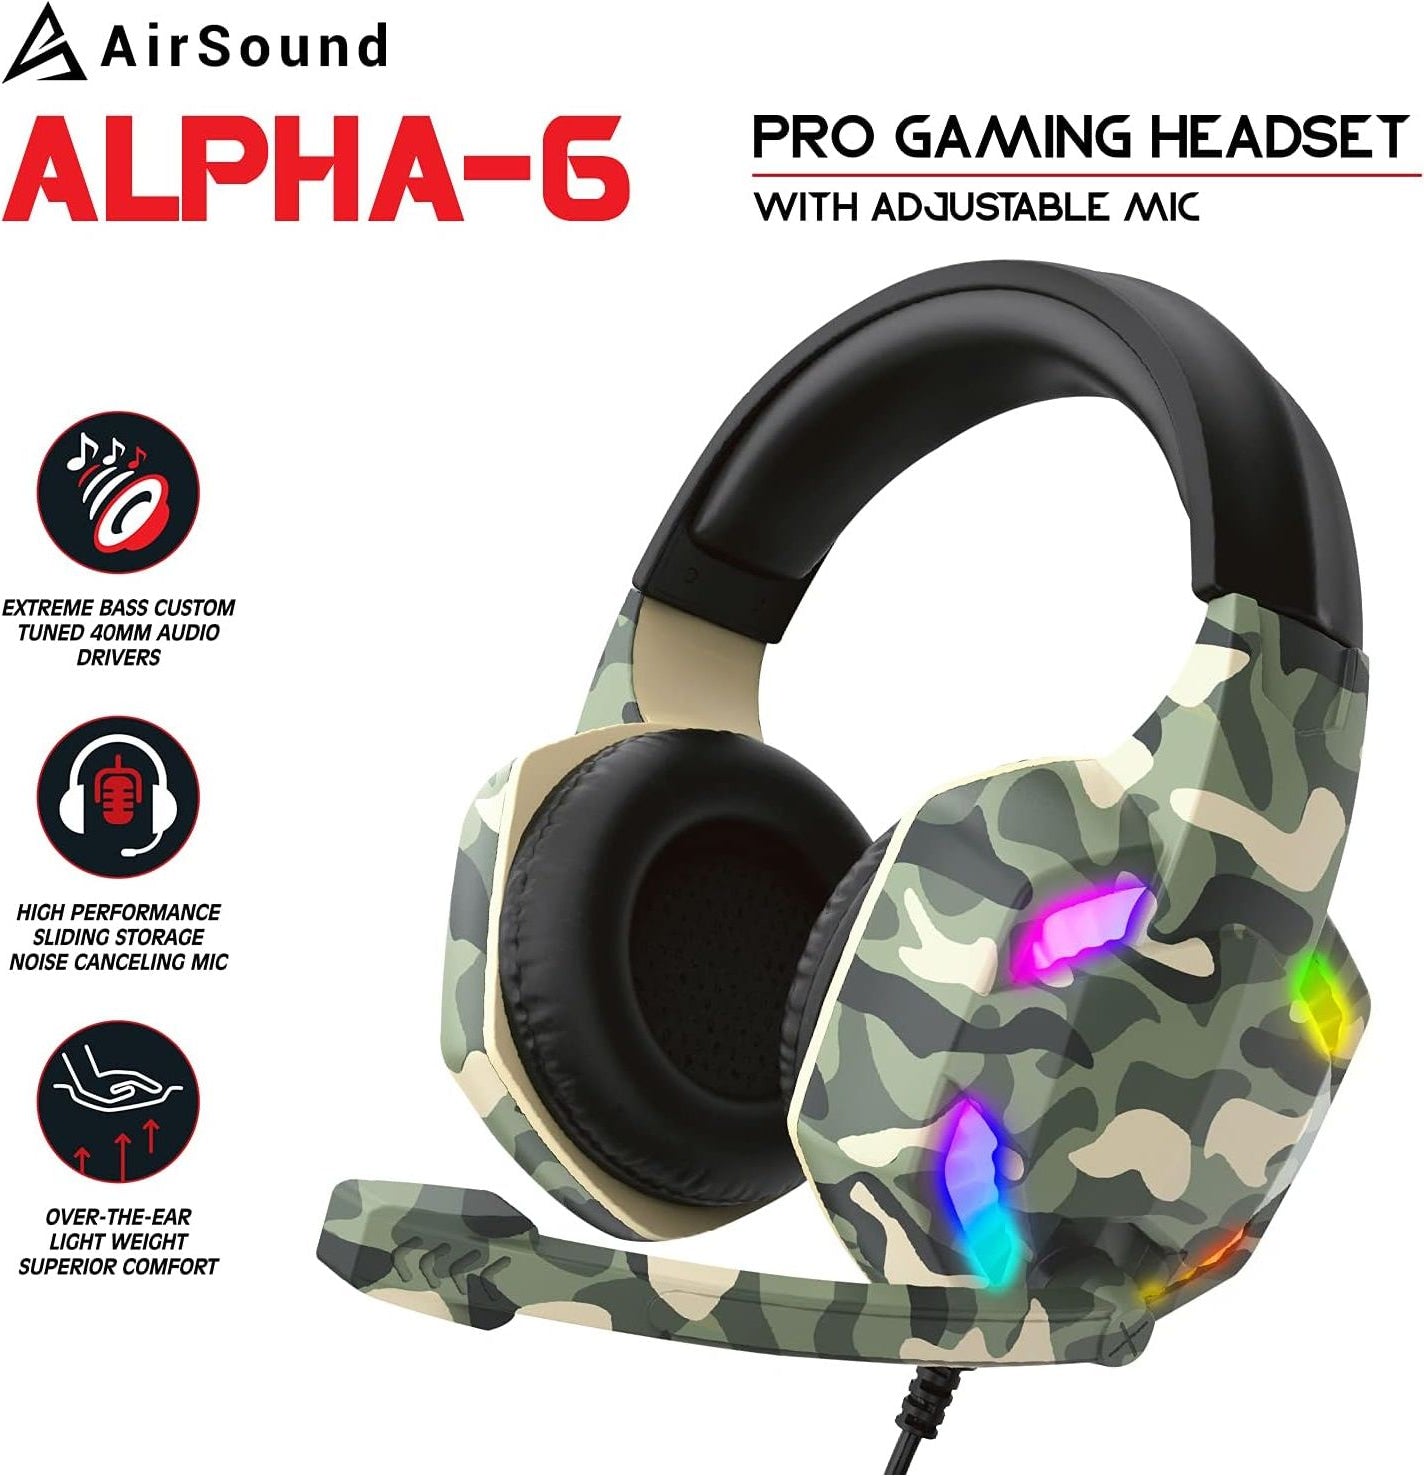 Airsound Alpha-6 Stereo Gaming Headset For Ps4 Pc Xbox One Ps5 Controller, Noise Cancelling Over-Ear Headphones With Mic, Rbg Led, Bass Surround, Soft Memory Earmuffs For Laptop Mac Nintendo Nes Games